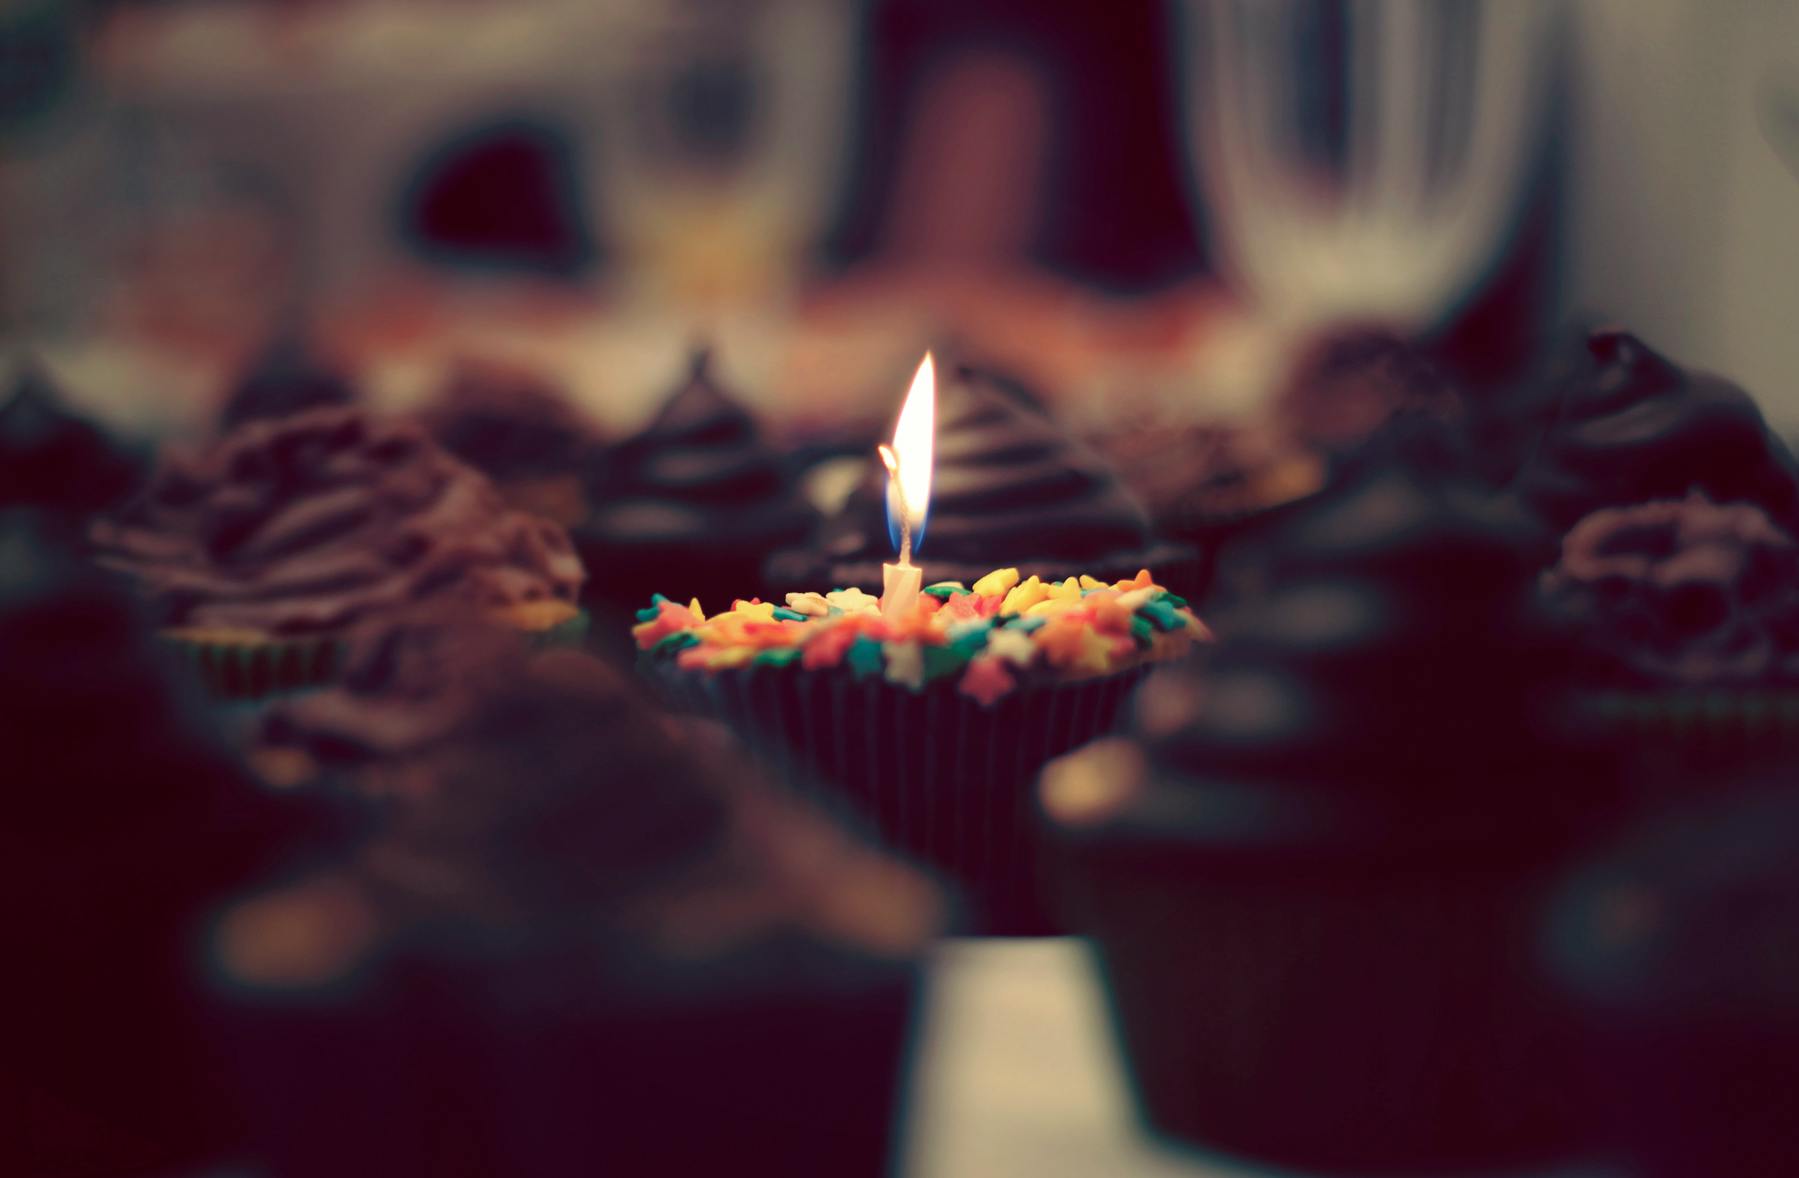 a close up of a cupcake with a lit candle, a tilt shift photo, by Karl Buesgen, pexels, happening, retro stylised, black, birthday, instagram photo